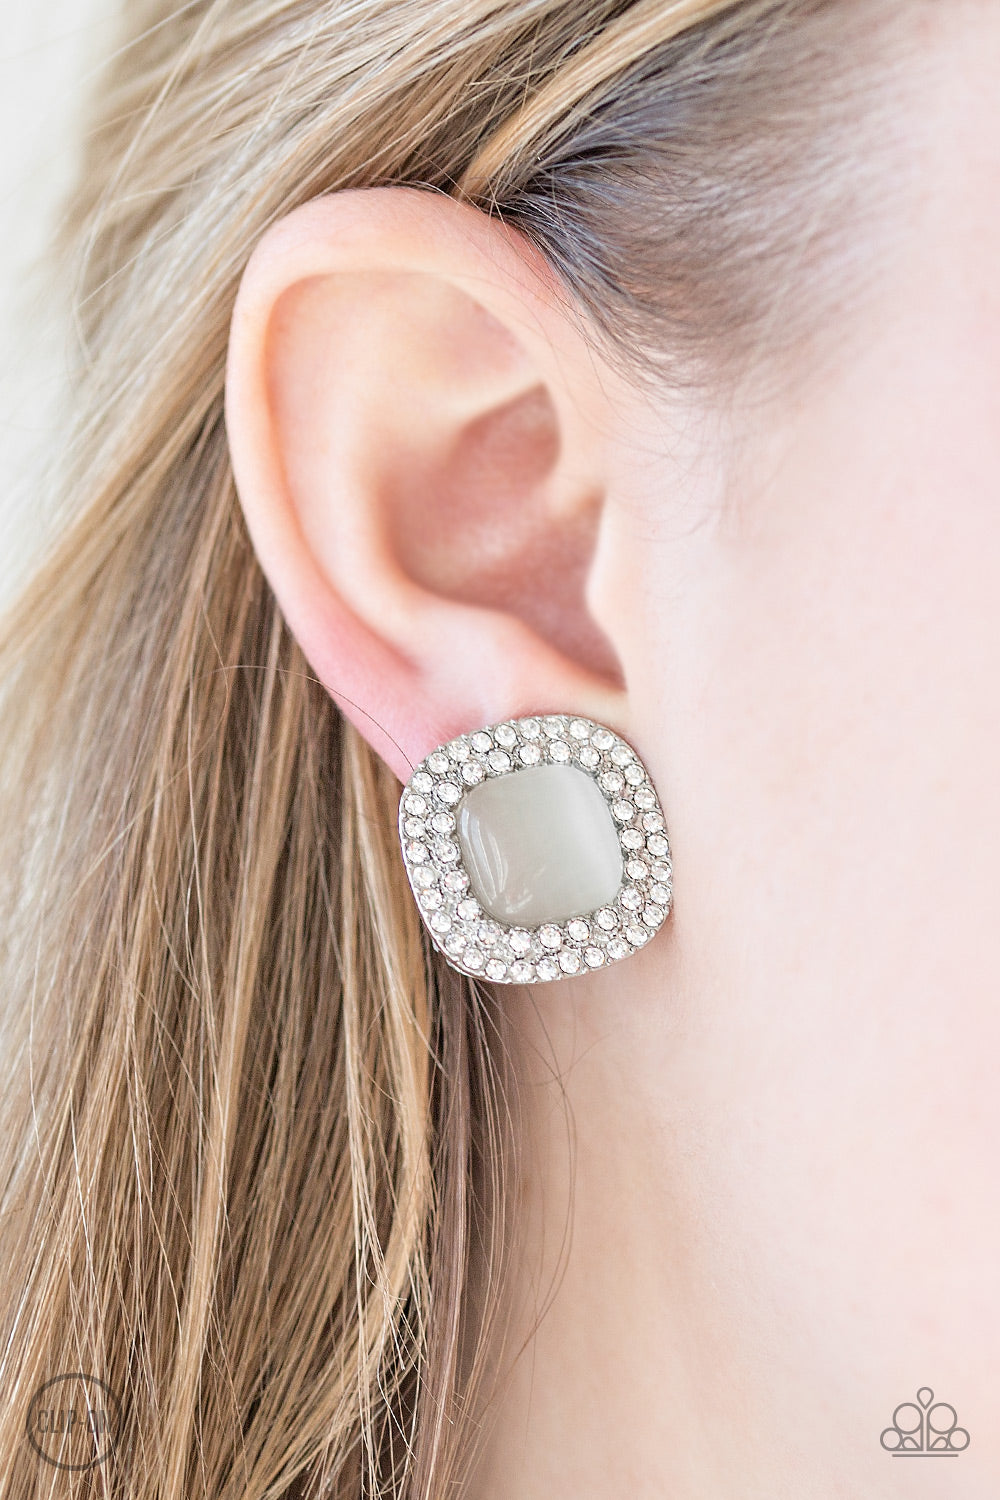 Paparazzi Earring - Dew What I Dew - White Clip-On